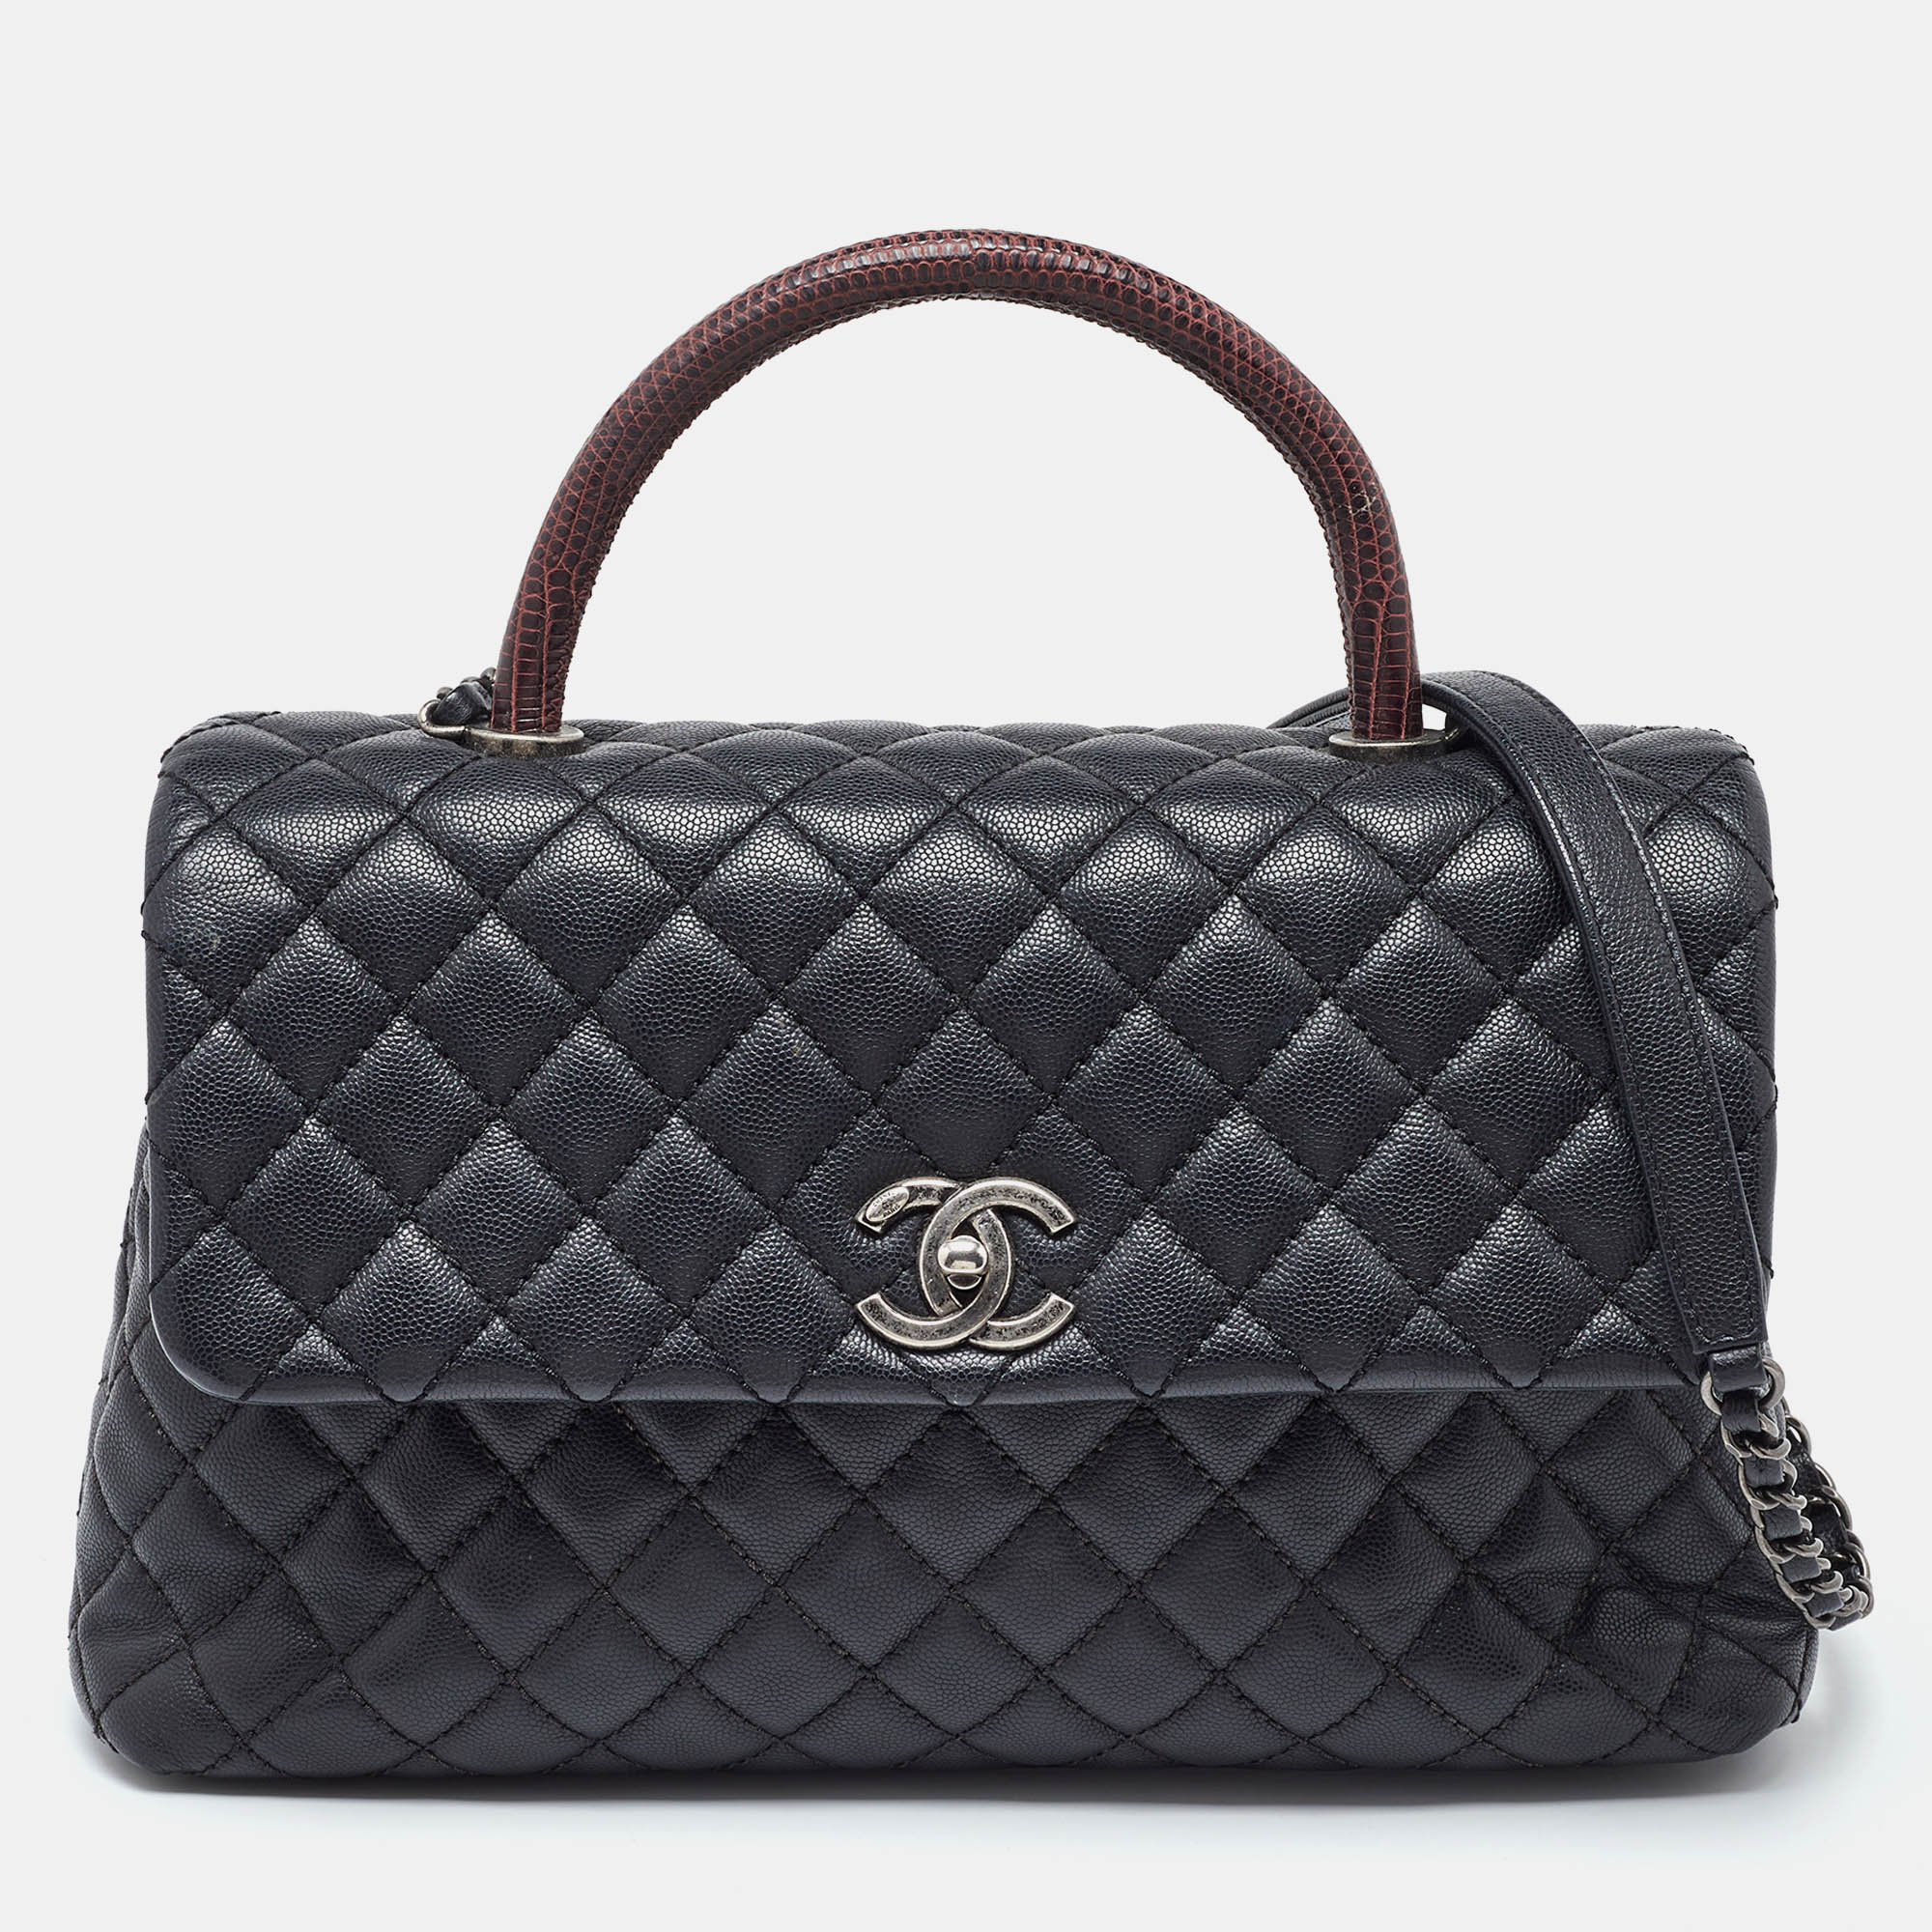 Chanel black/red quilted caviar leather and lizard medium coco top handle bag